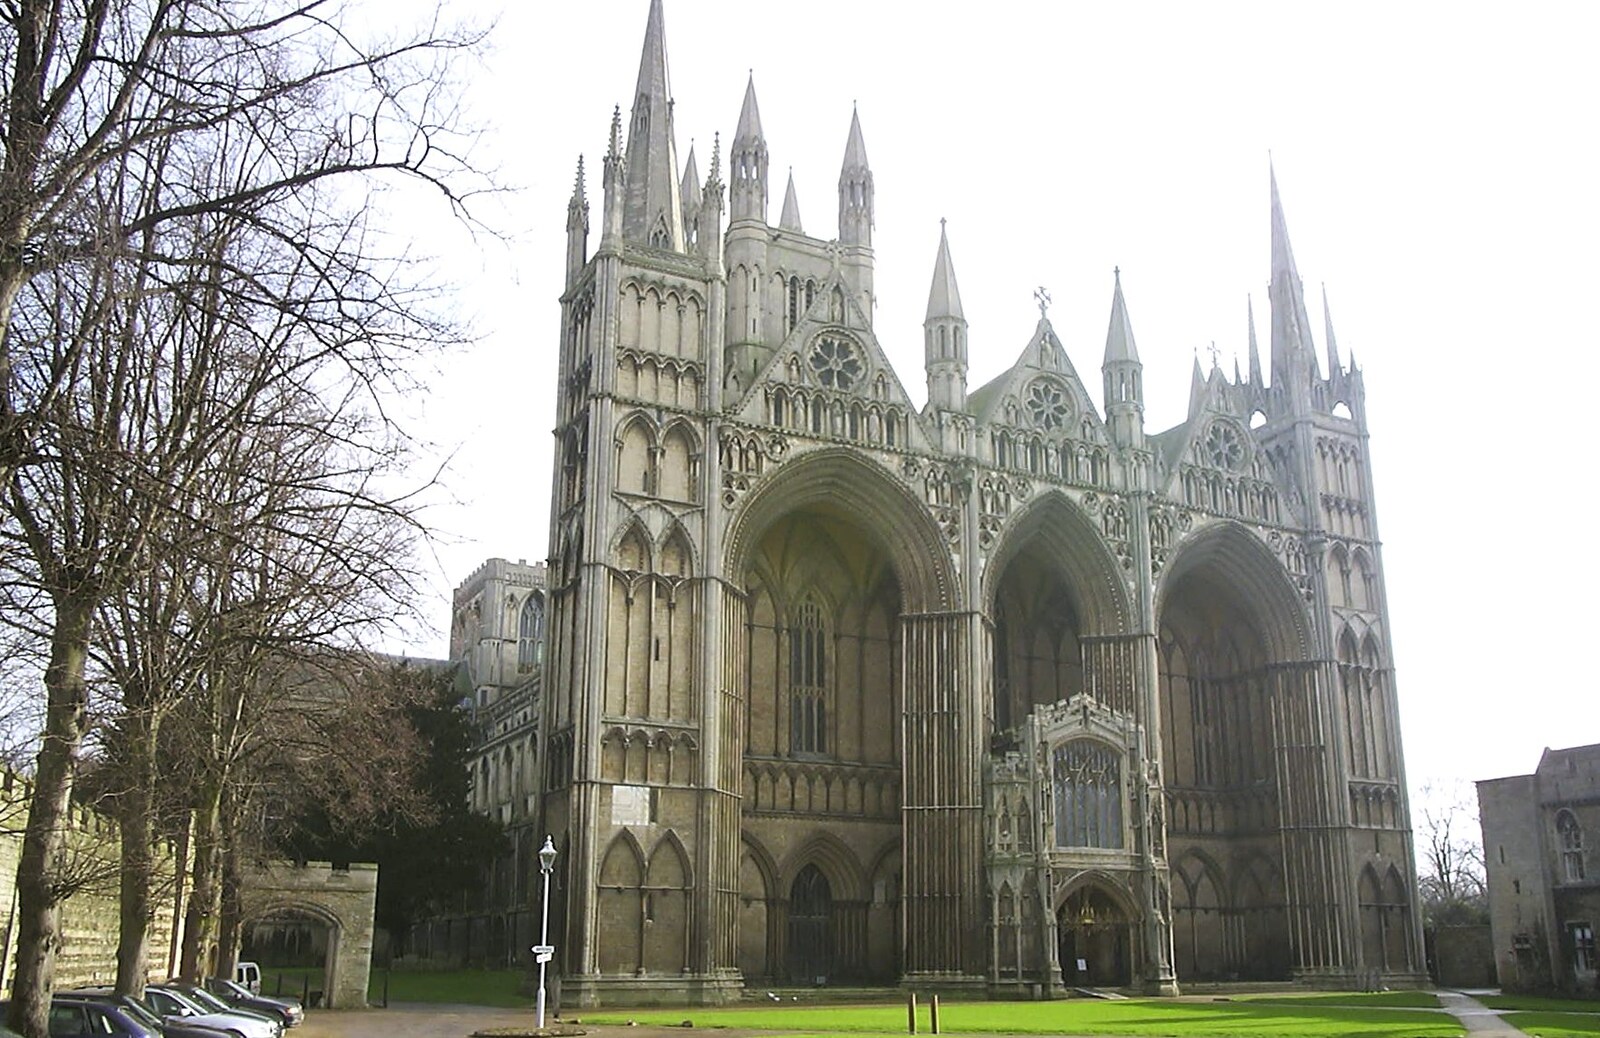 Another view of the unqique façade from Longview, Easyworld and Peterborough Cathedral, Cambridgeshire - 10th February 2003